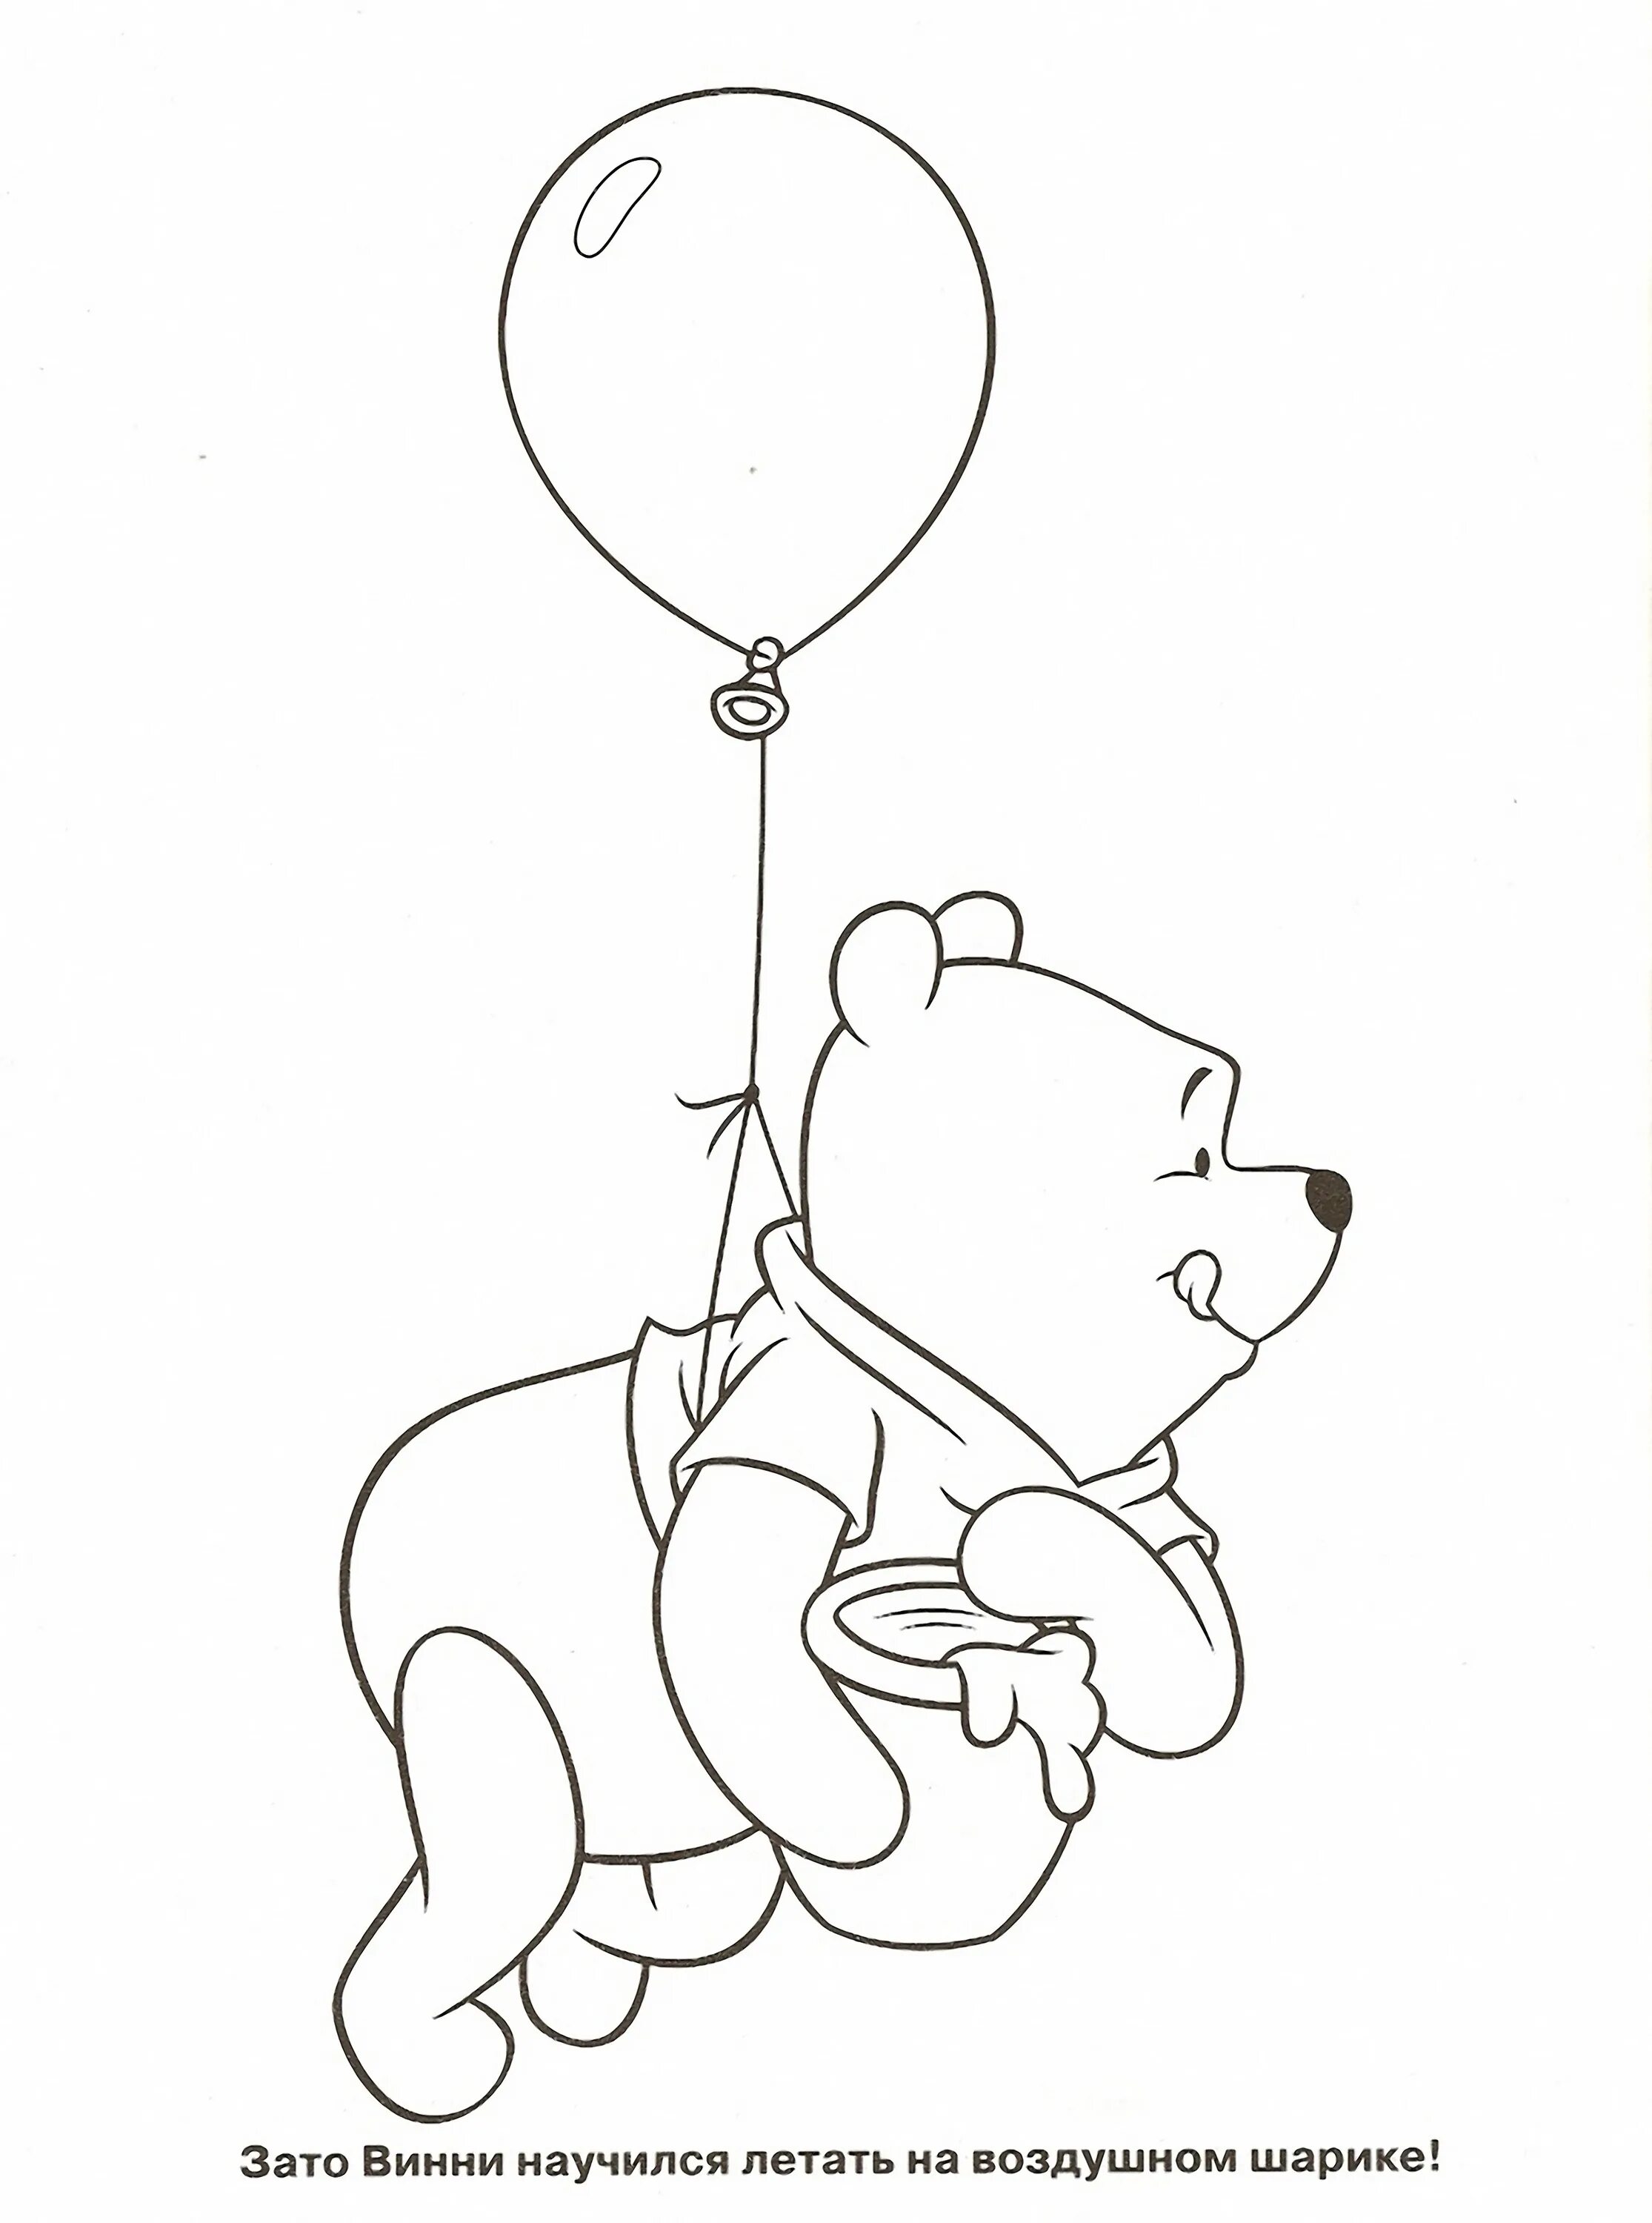 Winnie the pooh with balloon #13